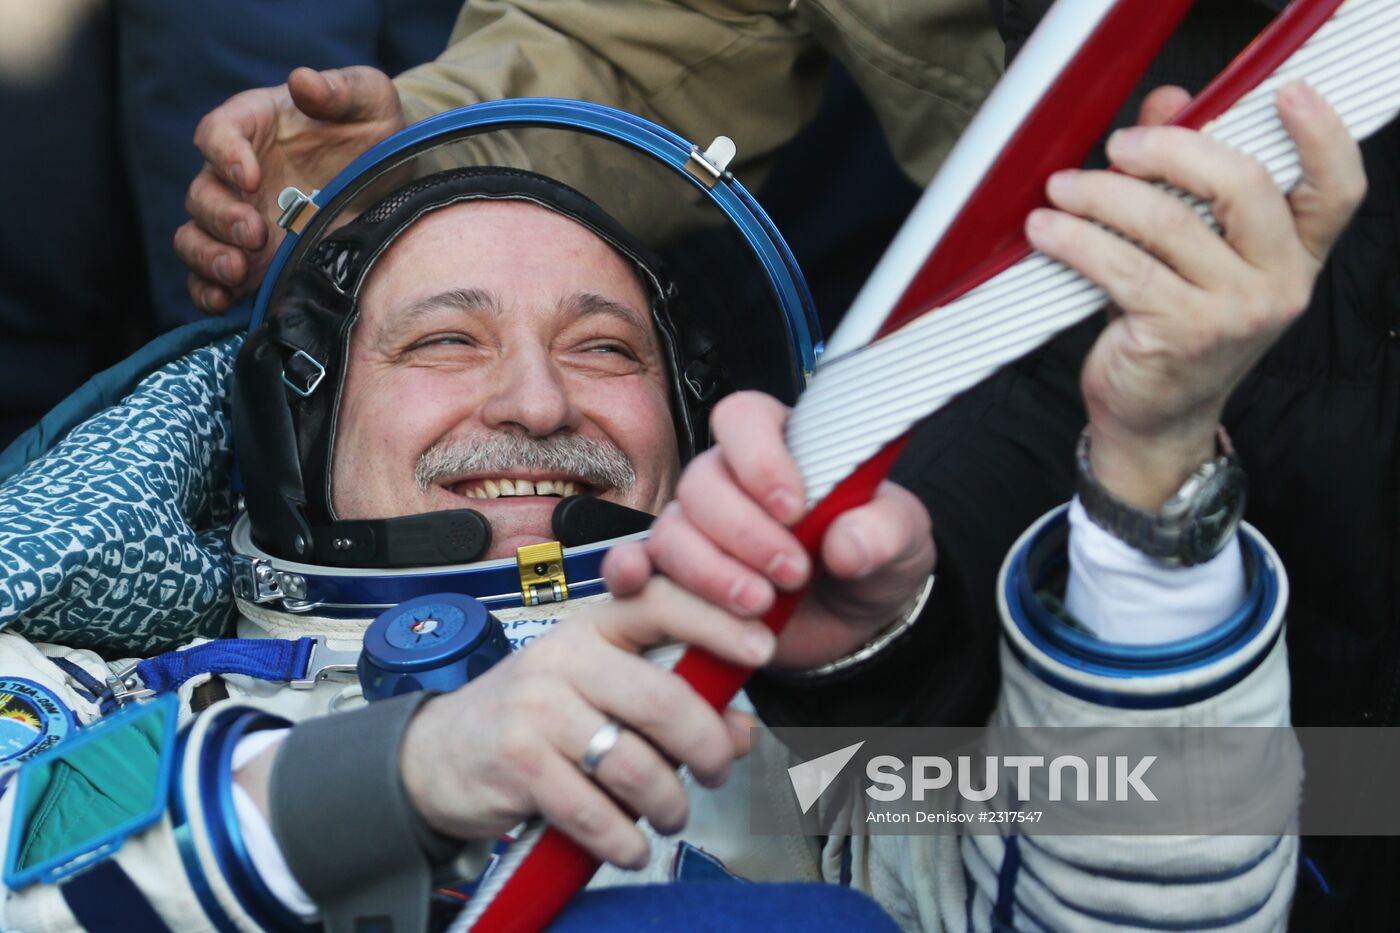 ISS capsule carries Olympic torch to Earth